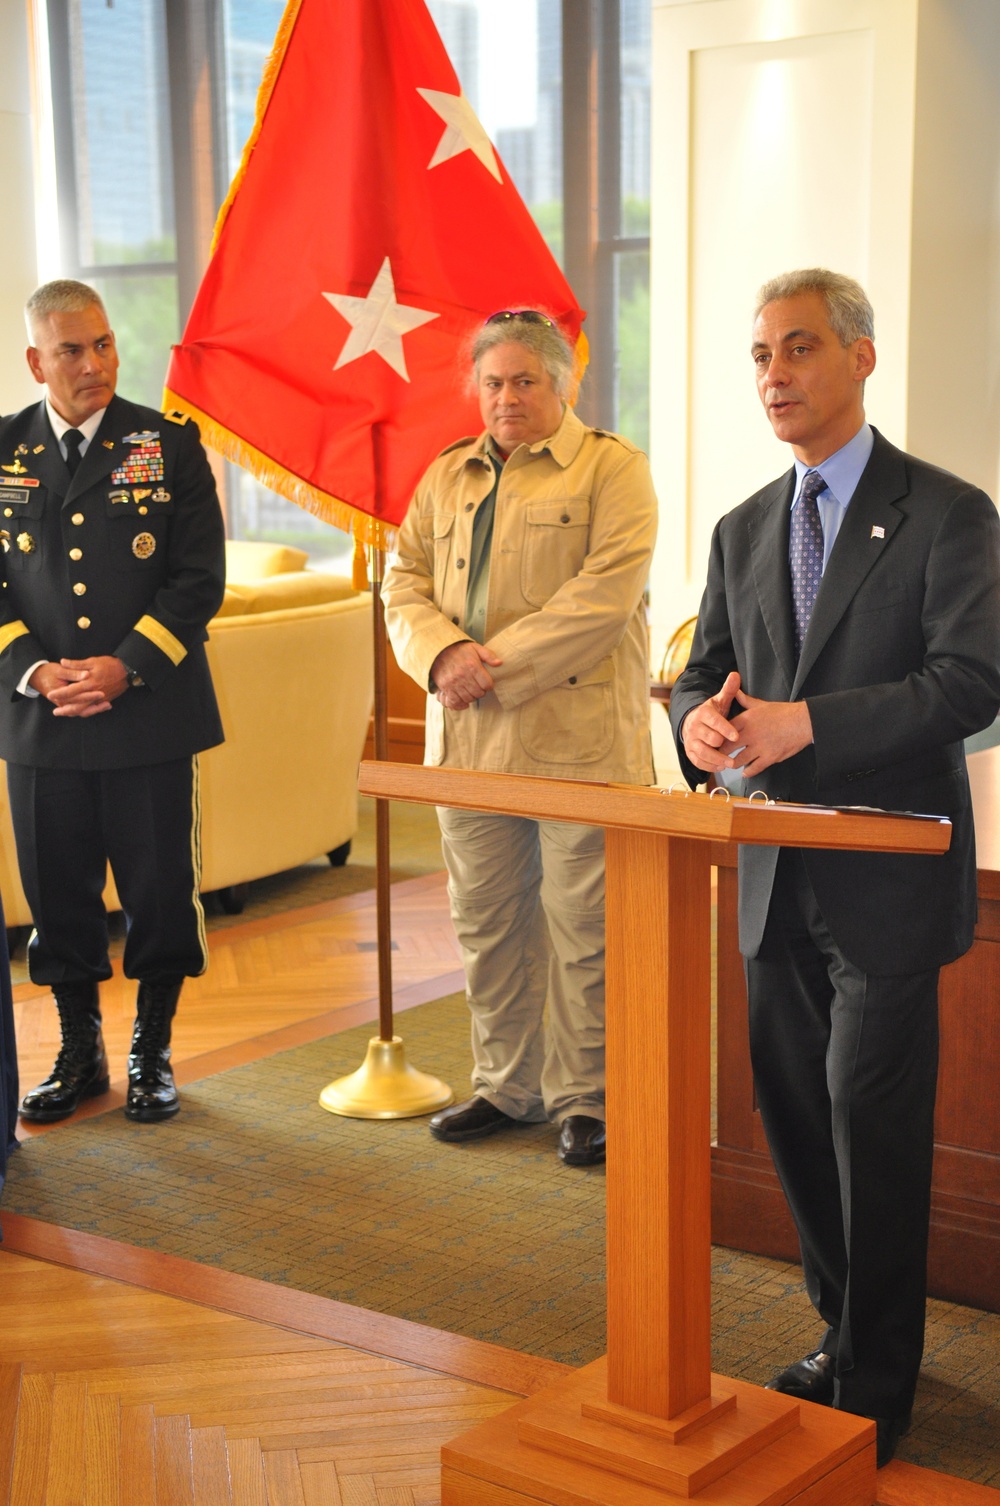 Mayor Rahm Emanuel thanks soldiers and families on Army Birthday